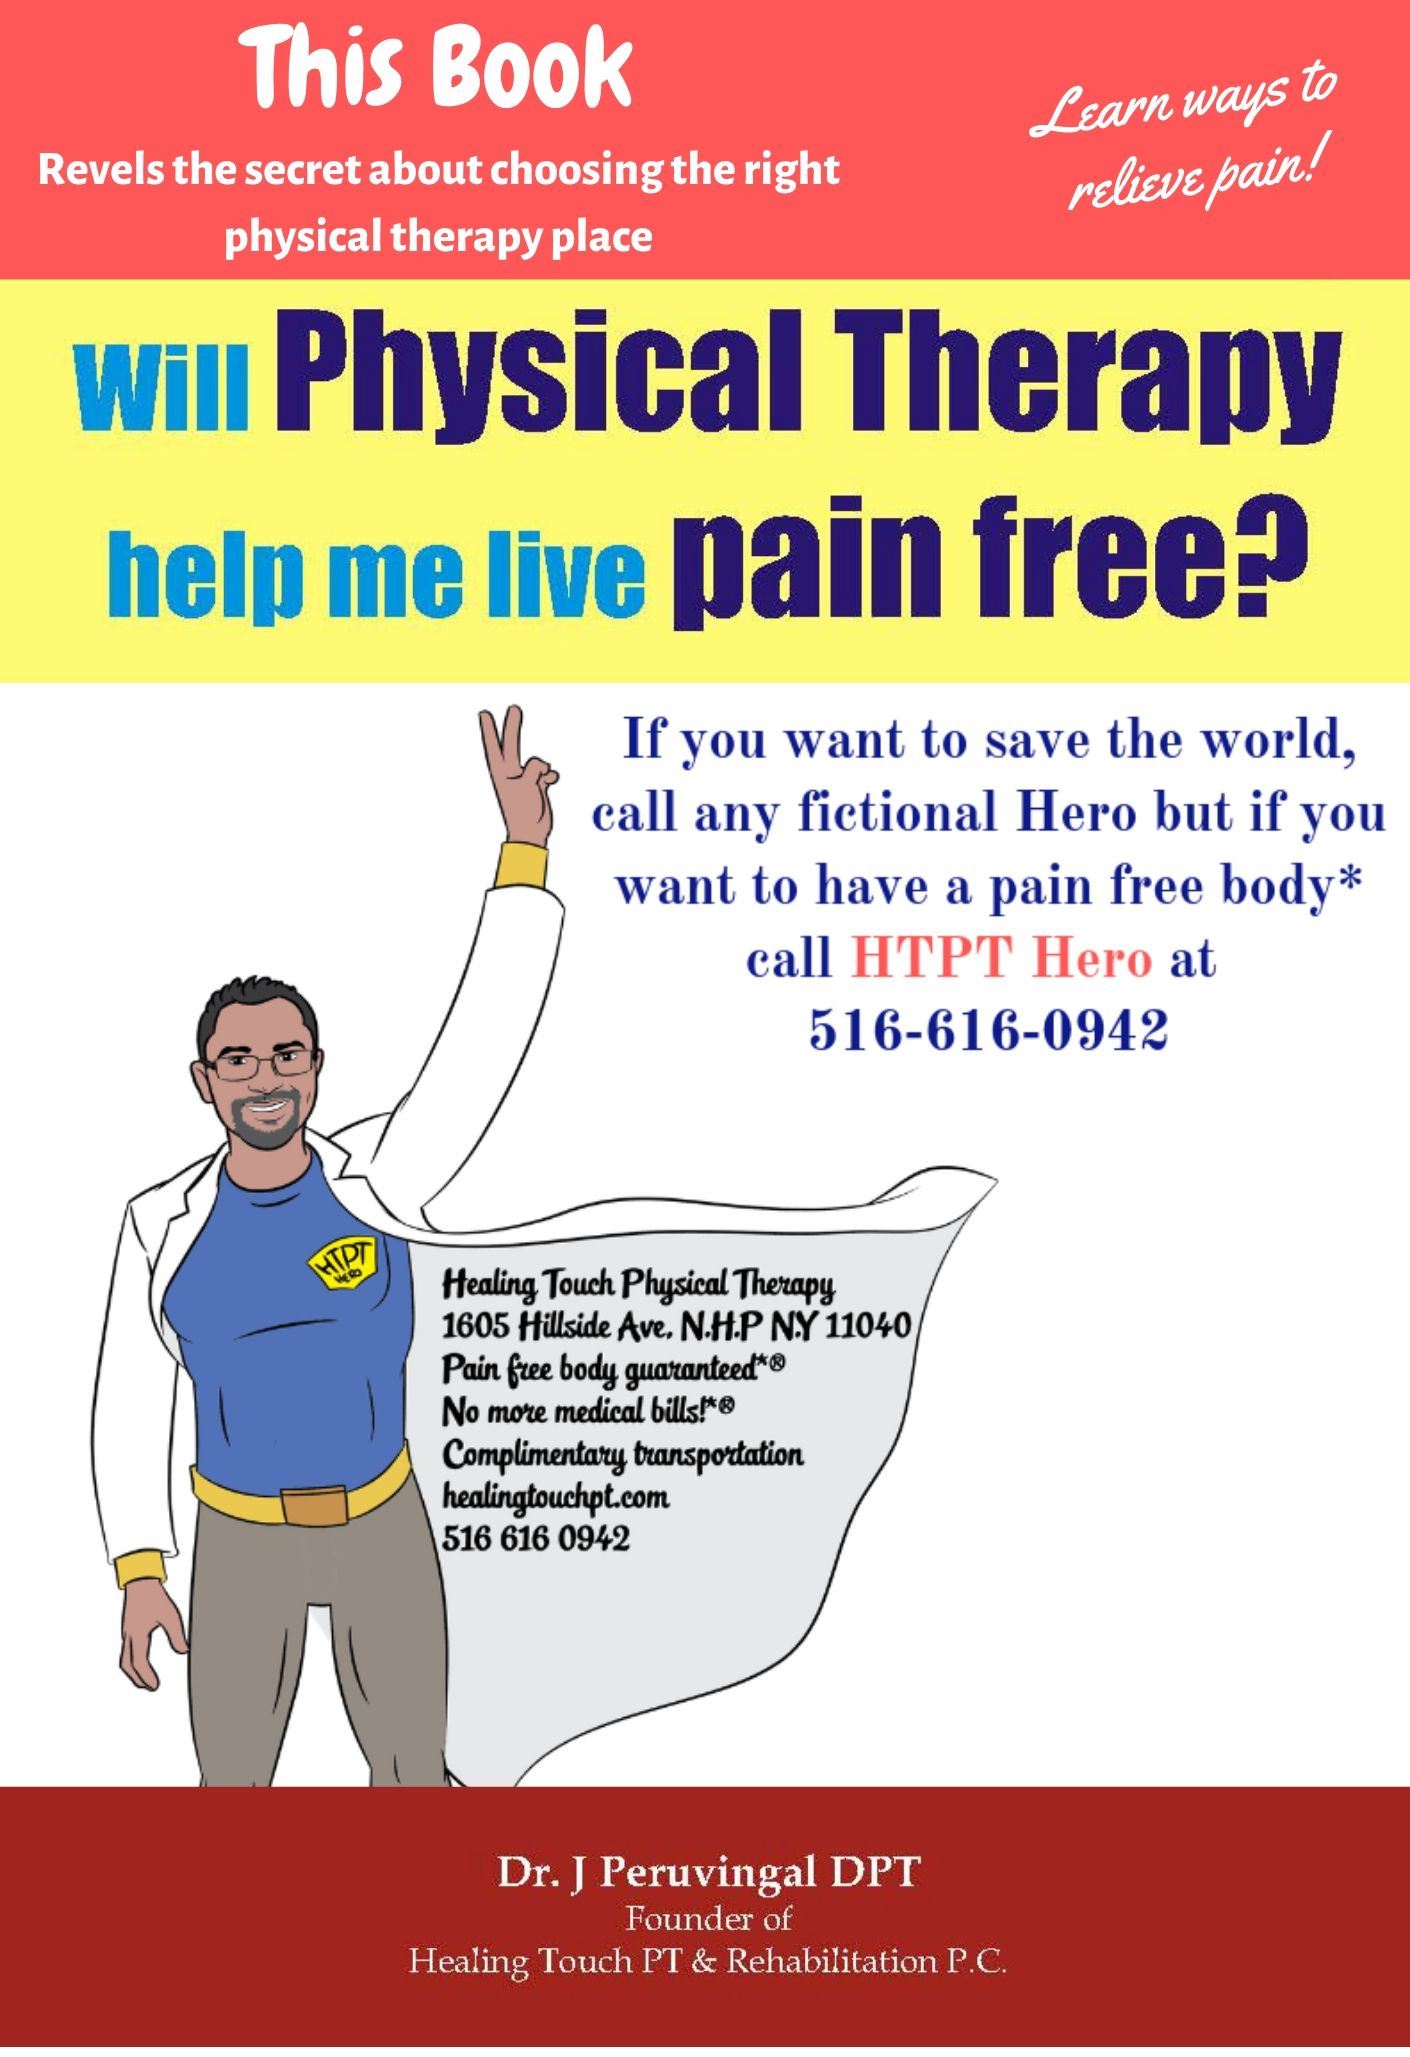 Will Physical Therapy help me live pain free